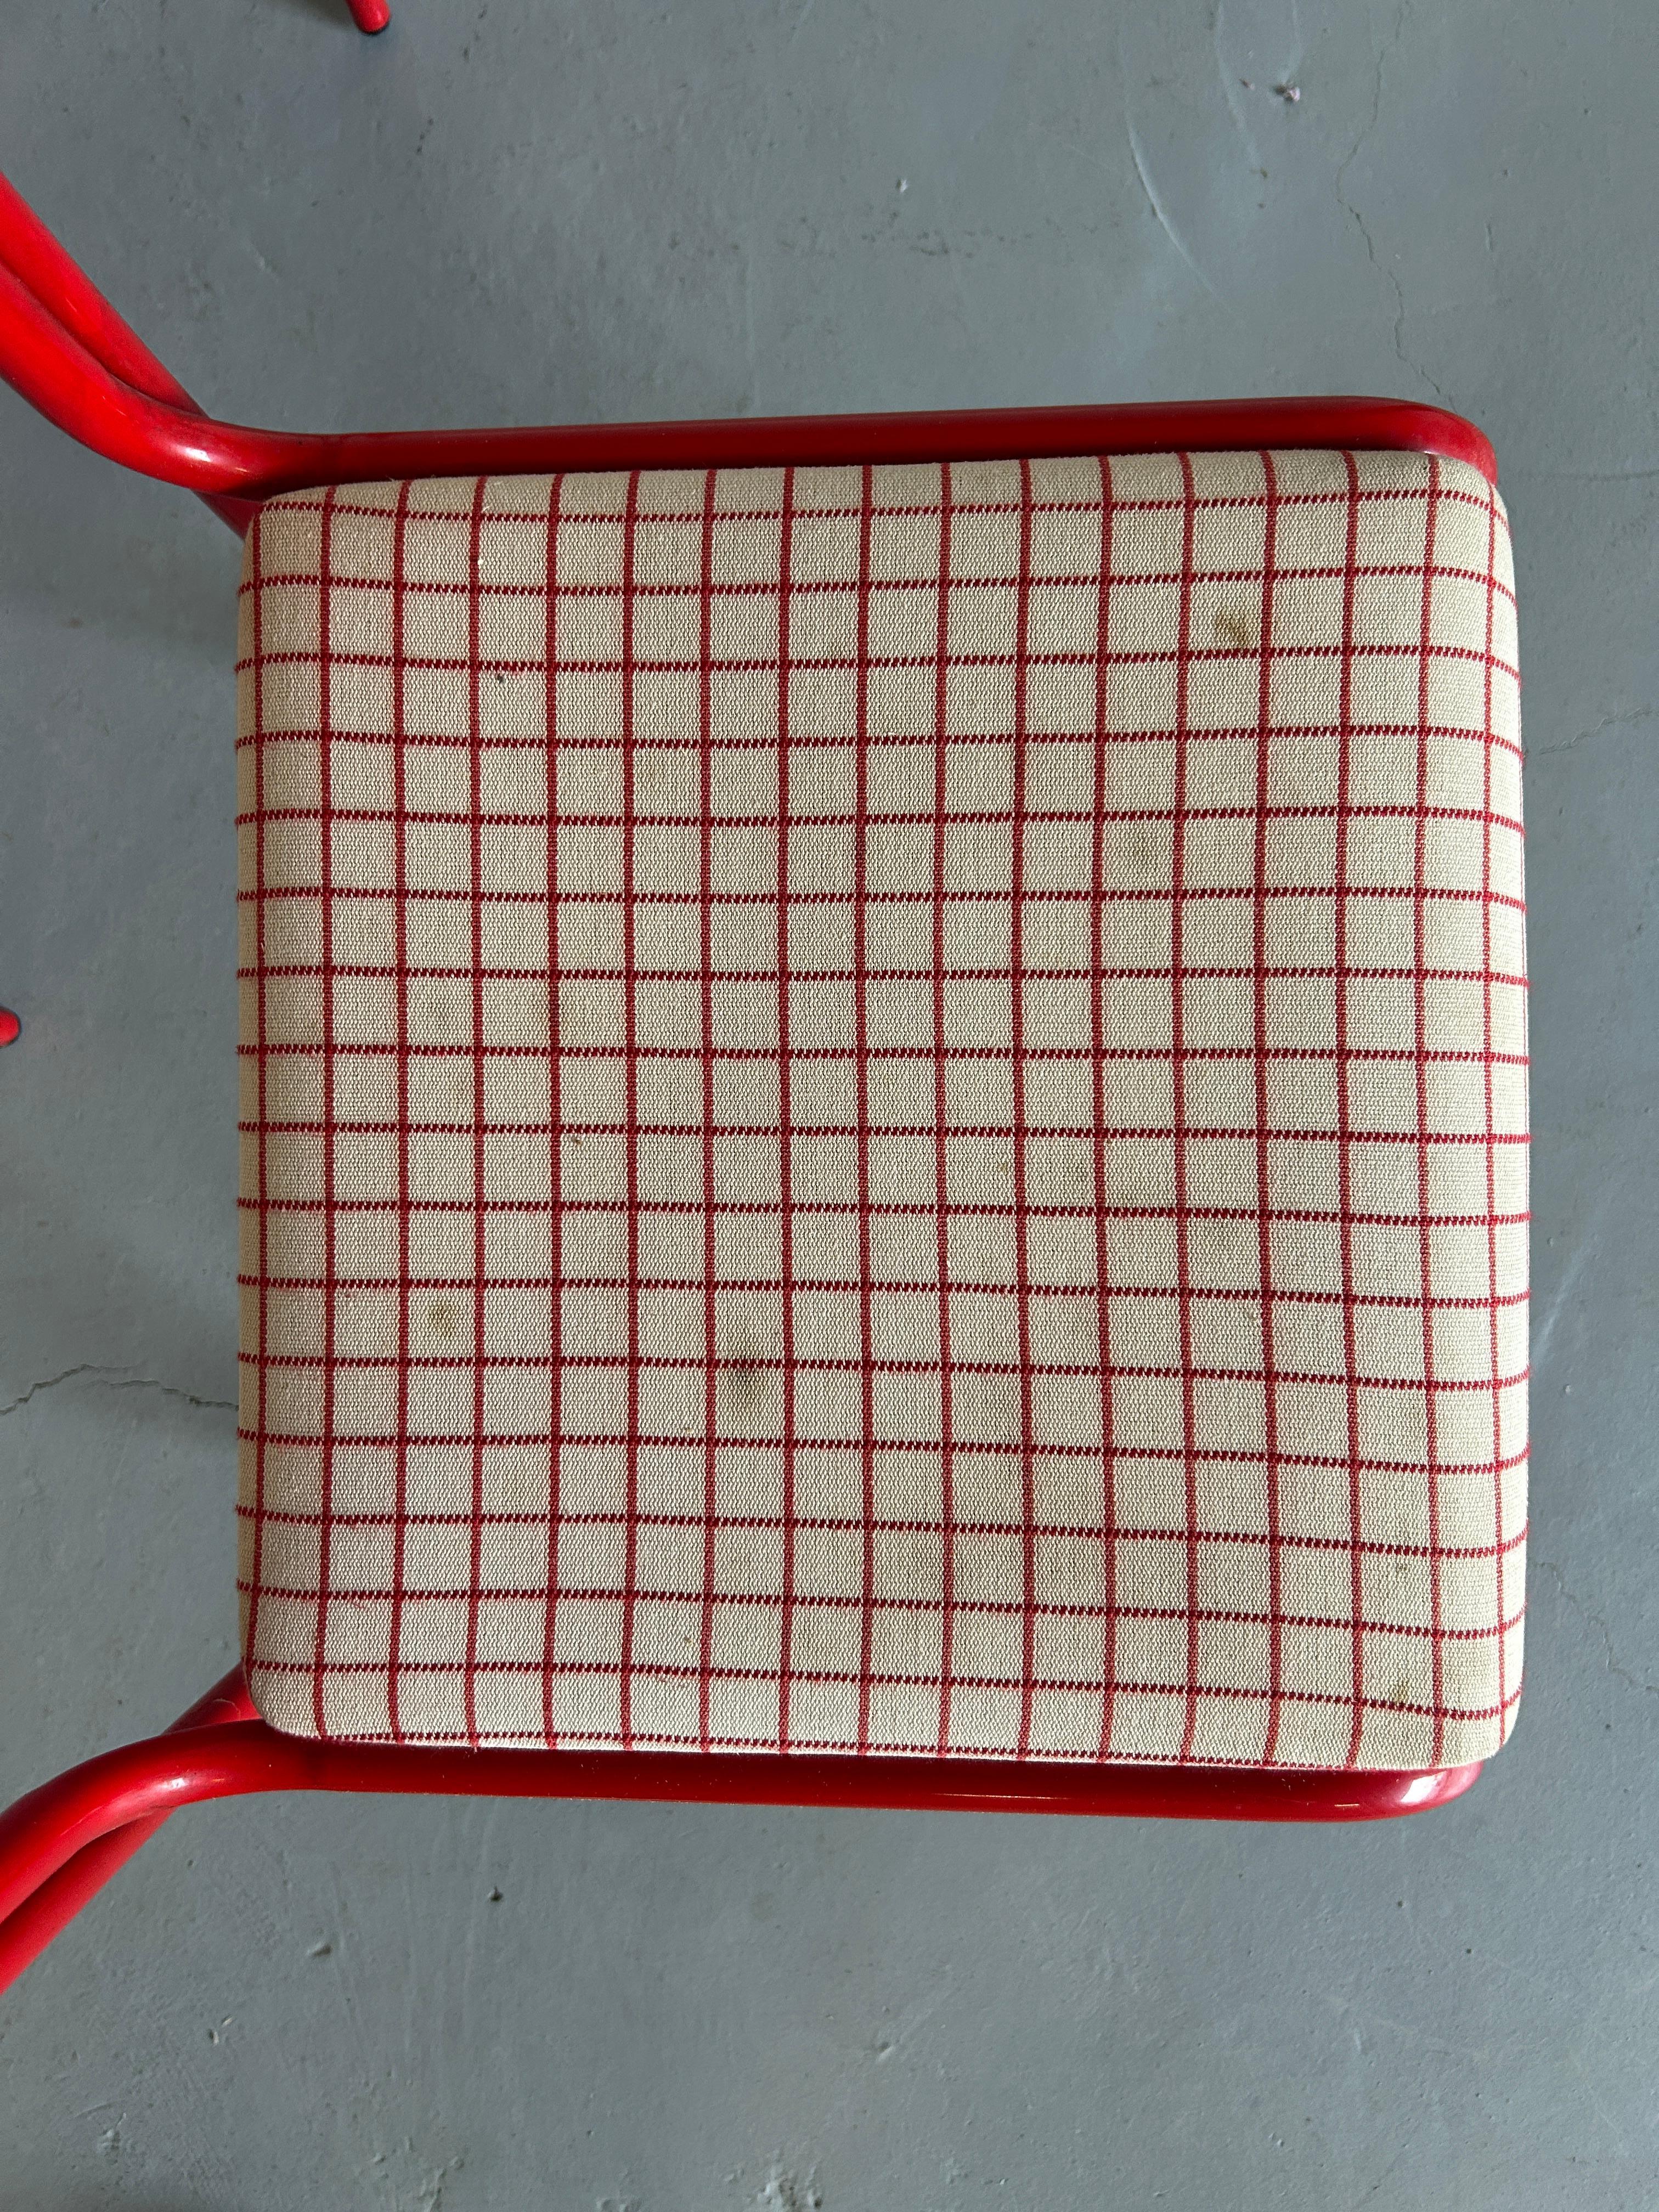 Set of 4 Pop-Art Syle Tubular Steel Checkered Red Upholstery Chairs, 80s Italy 4